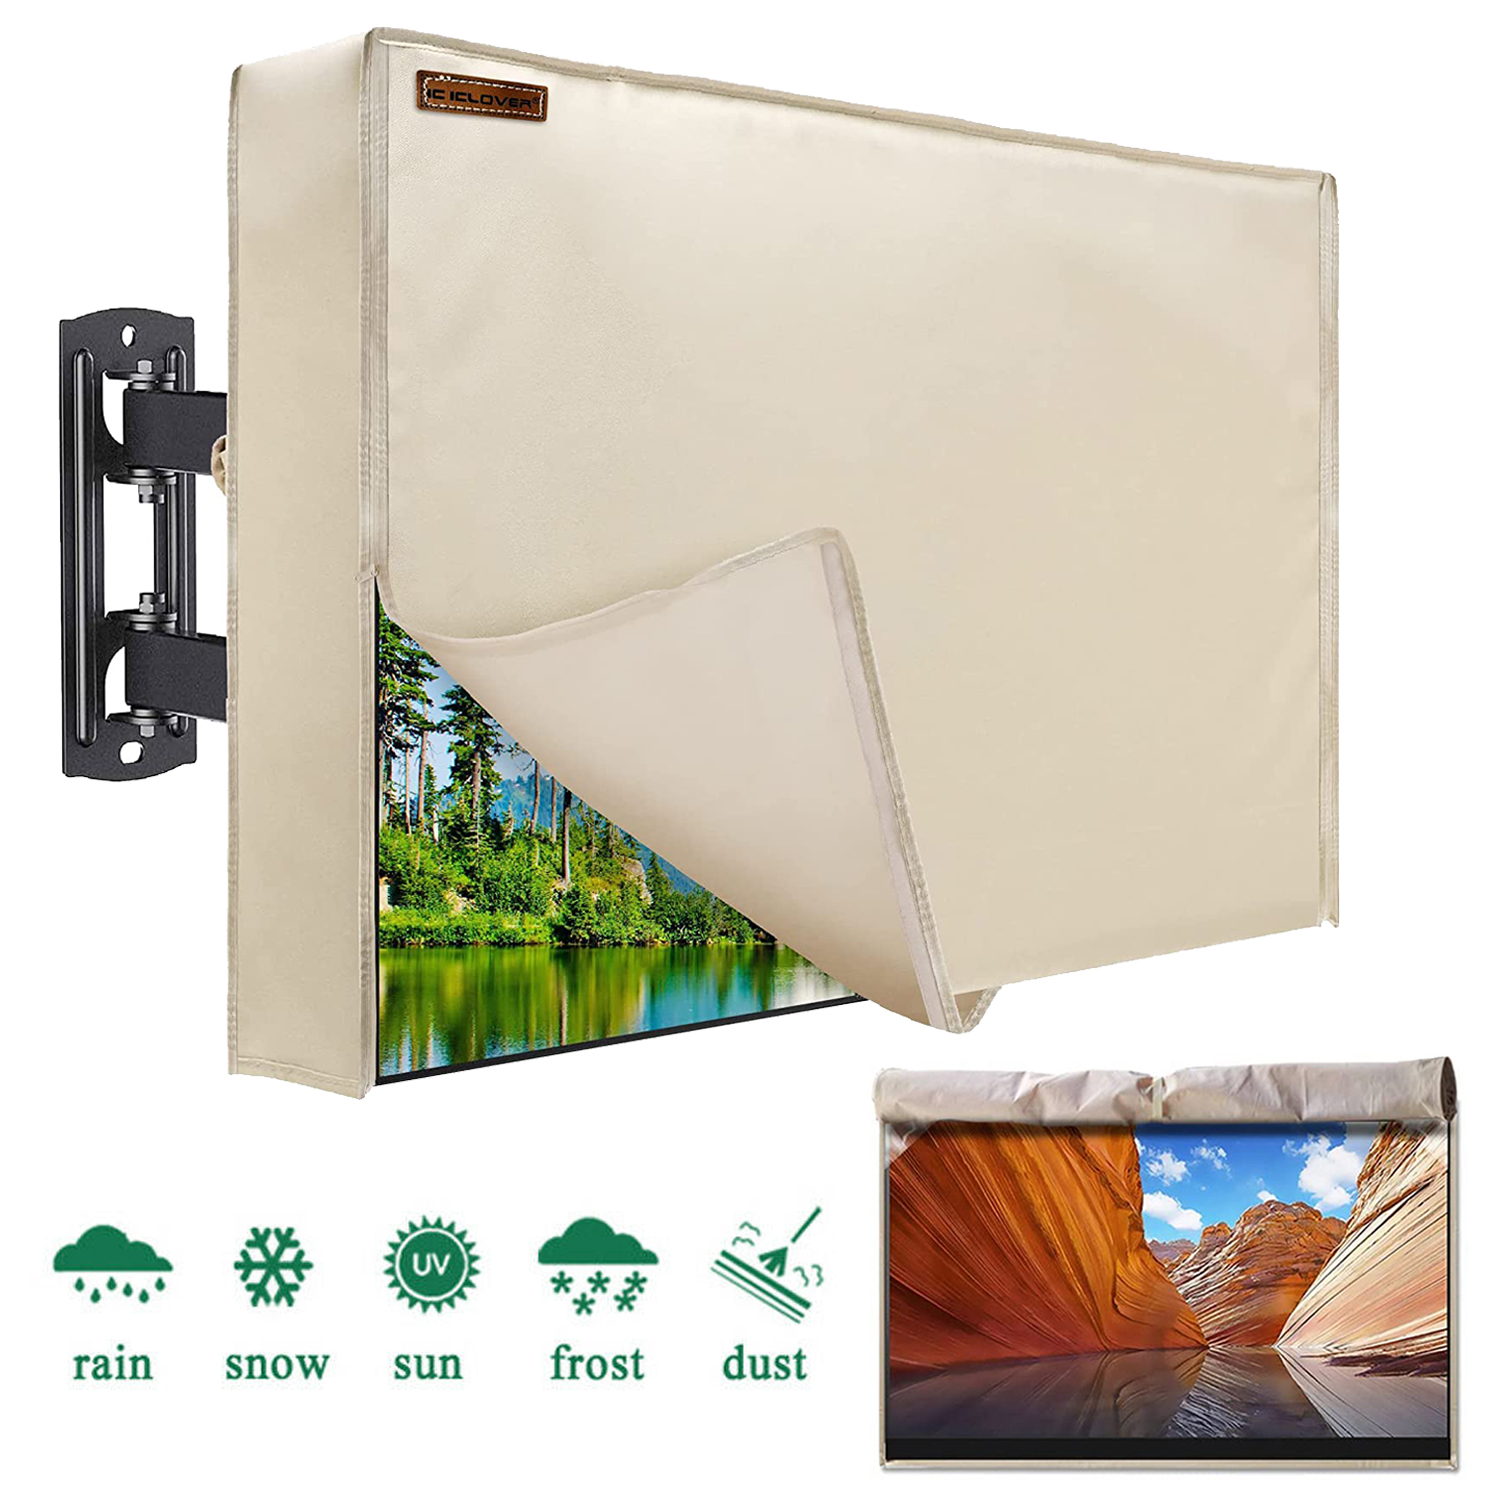 IC ICLOVER 40''-43" Outdoor Weatherproof LCD Plasma TV/Television Cover Flat Screen TV/Television Dustproof Protector with Waterproof Remote Pocket, Beige - image 1 of 9